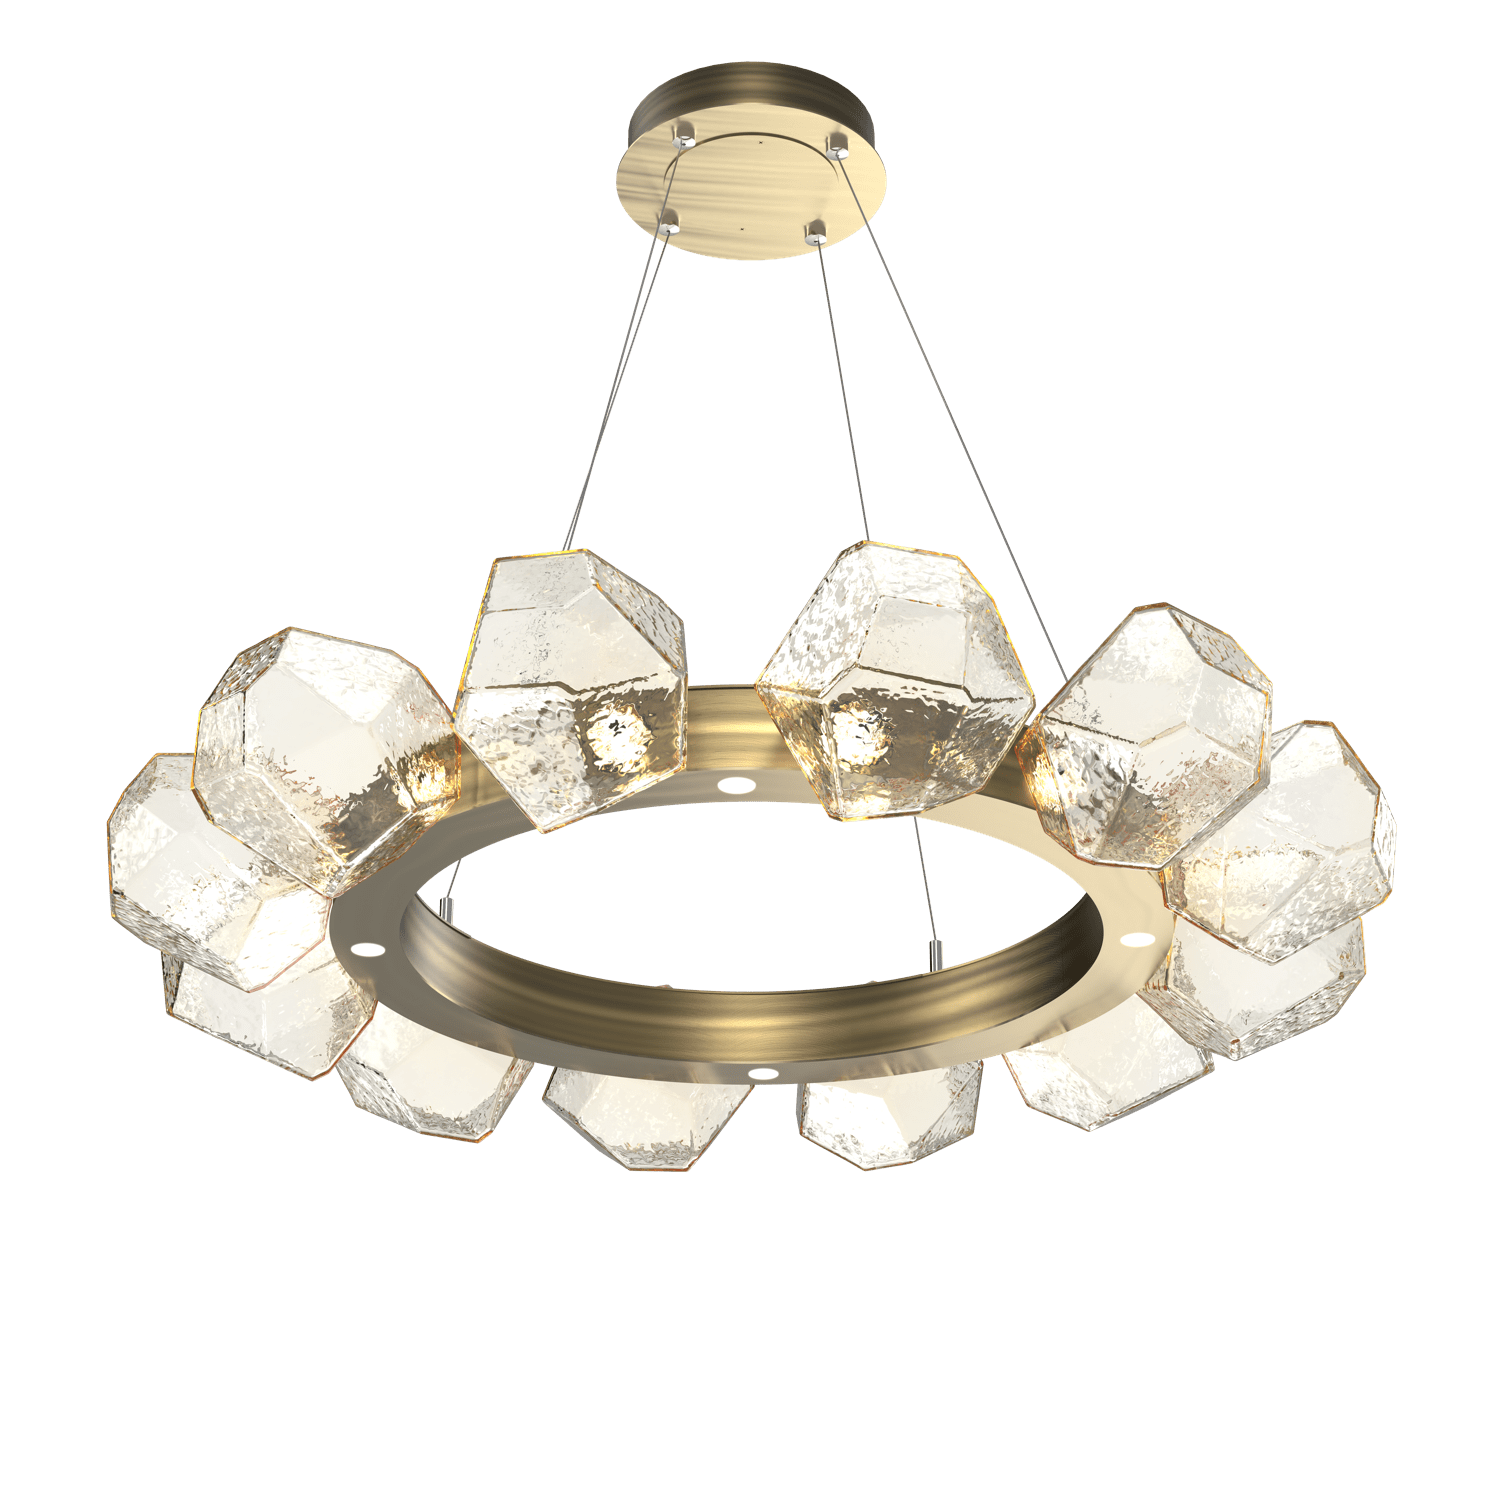 CHB0039-36-HB-A-Hammerton-Studio-Gem-36-inch-radial-ring-chandelier-with-heritage-brass-finish-and-amber-blown-glass-shades-and-LED-lamping